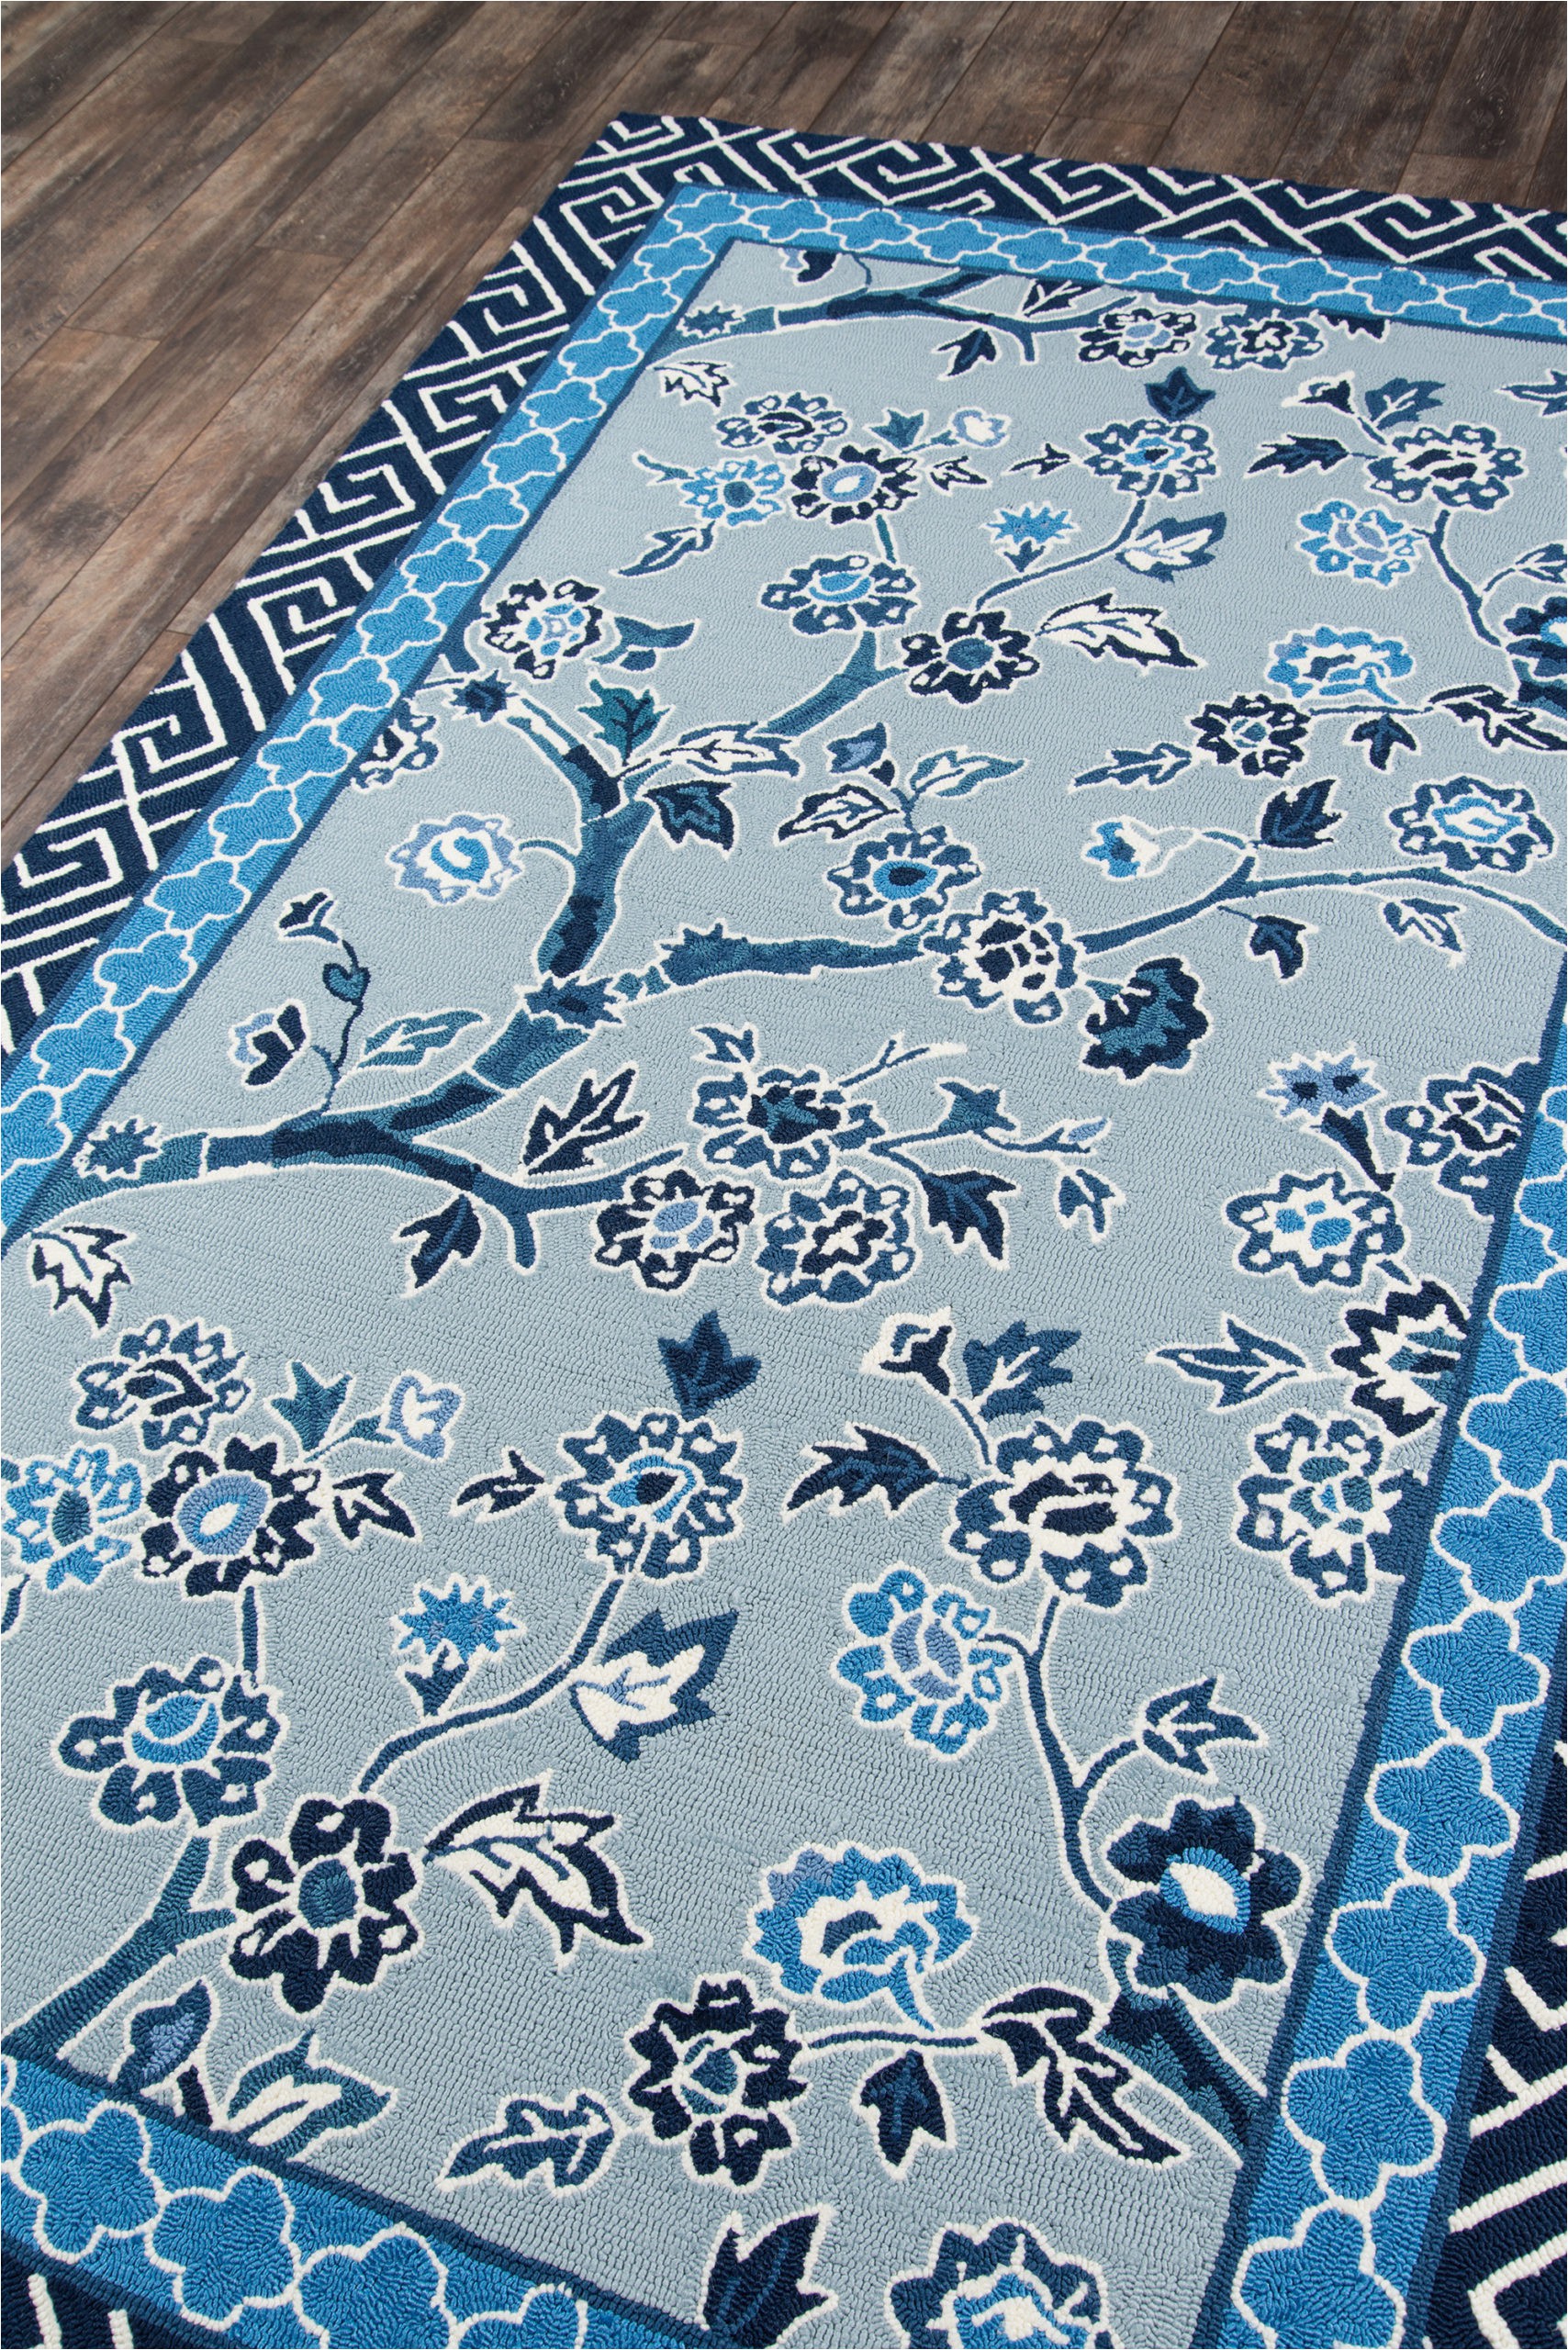 Blue and White Chinoiserie Rug Blossom Dearie Blue Chinoiserie All Weather Indoor Outdoor